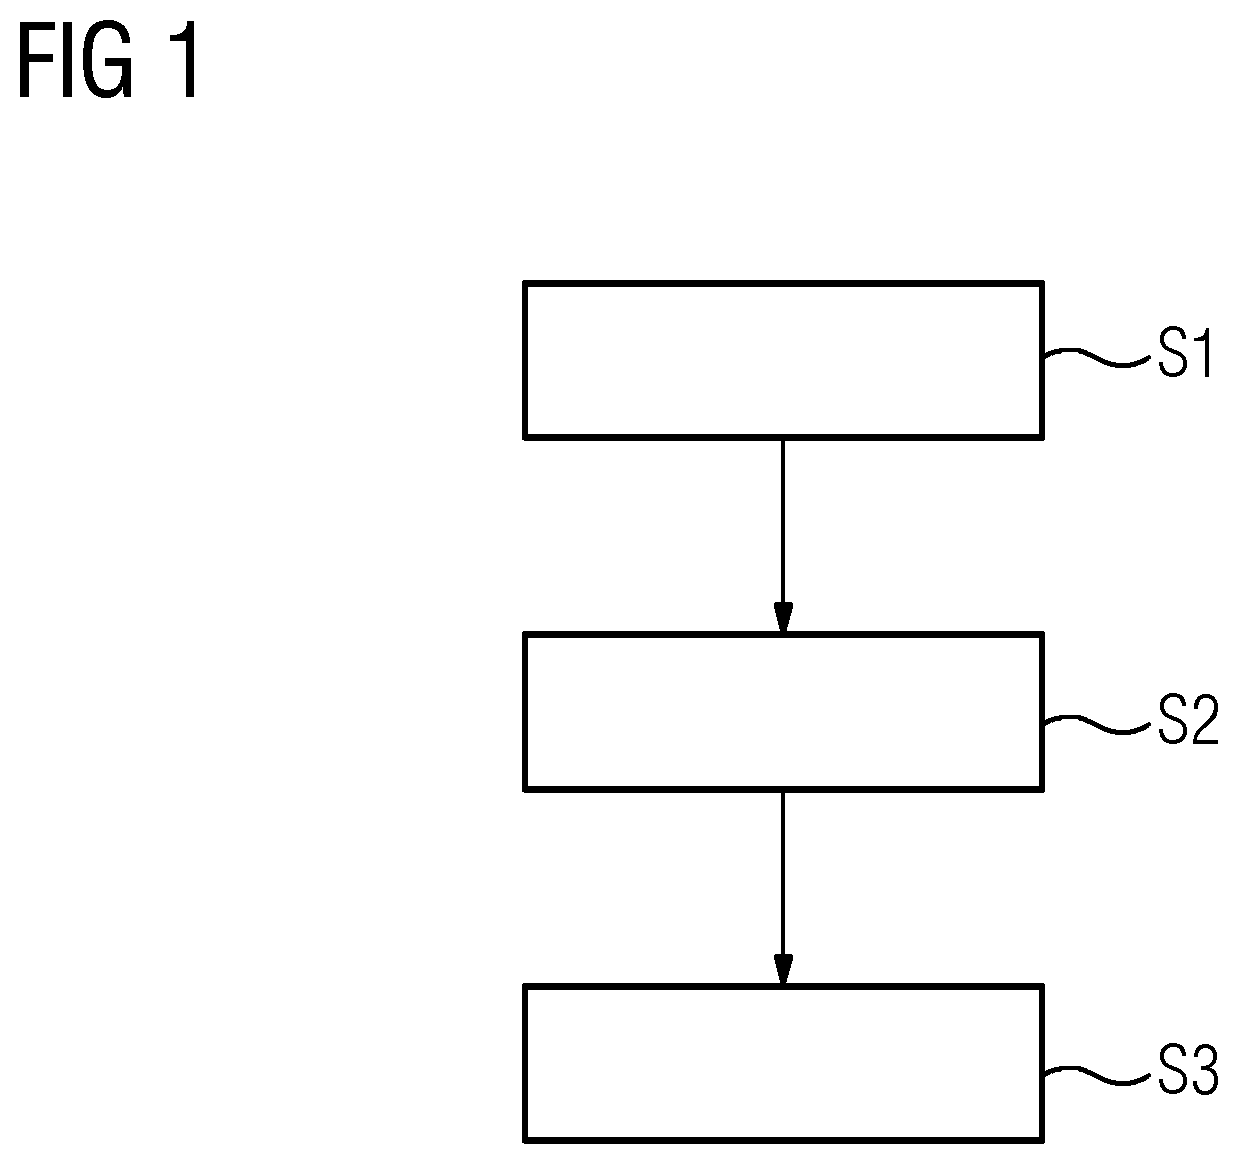 Method for determining at least one region in at least one input model for at least one element to be placed